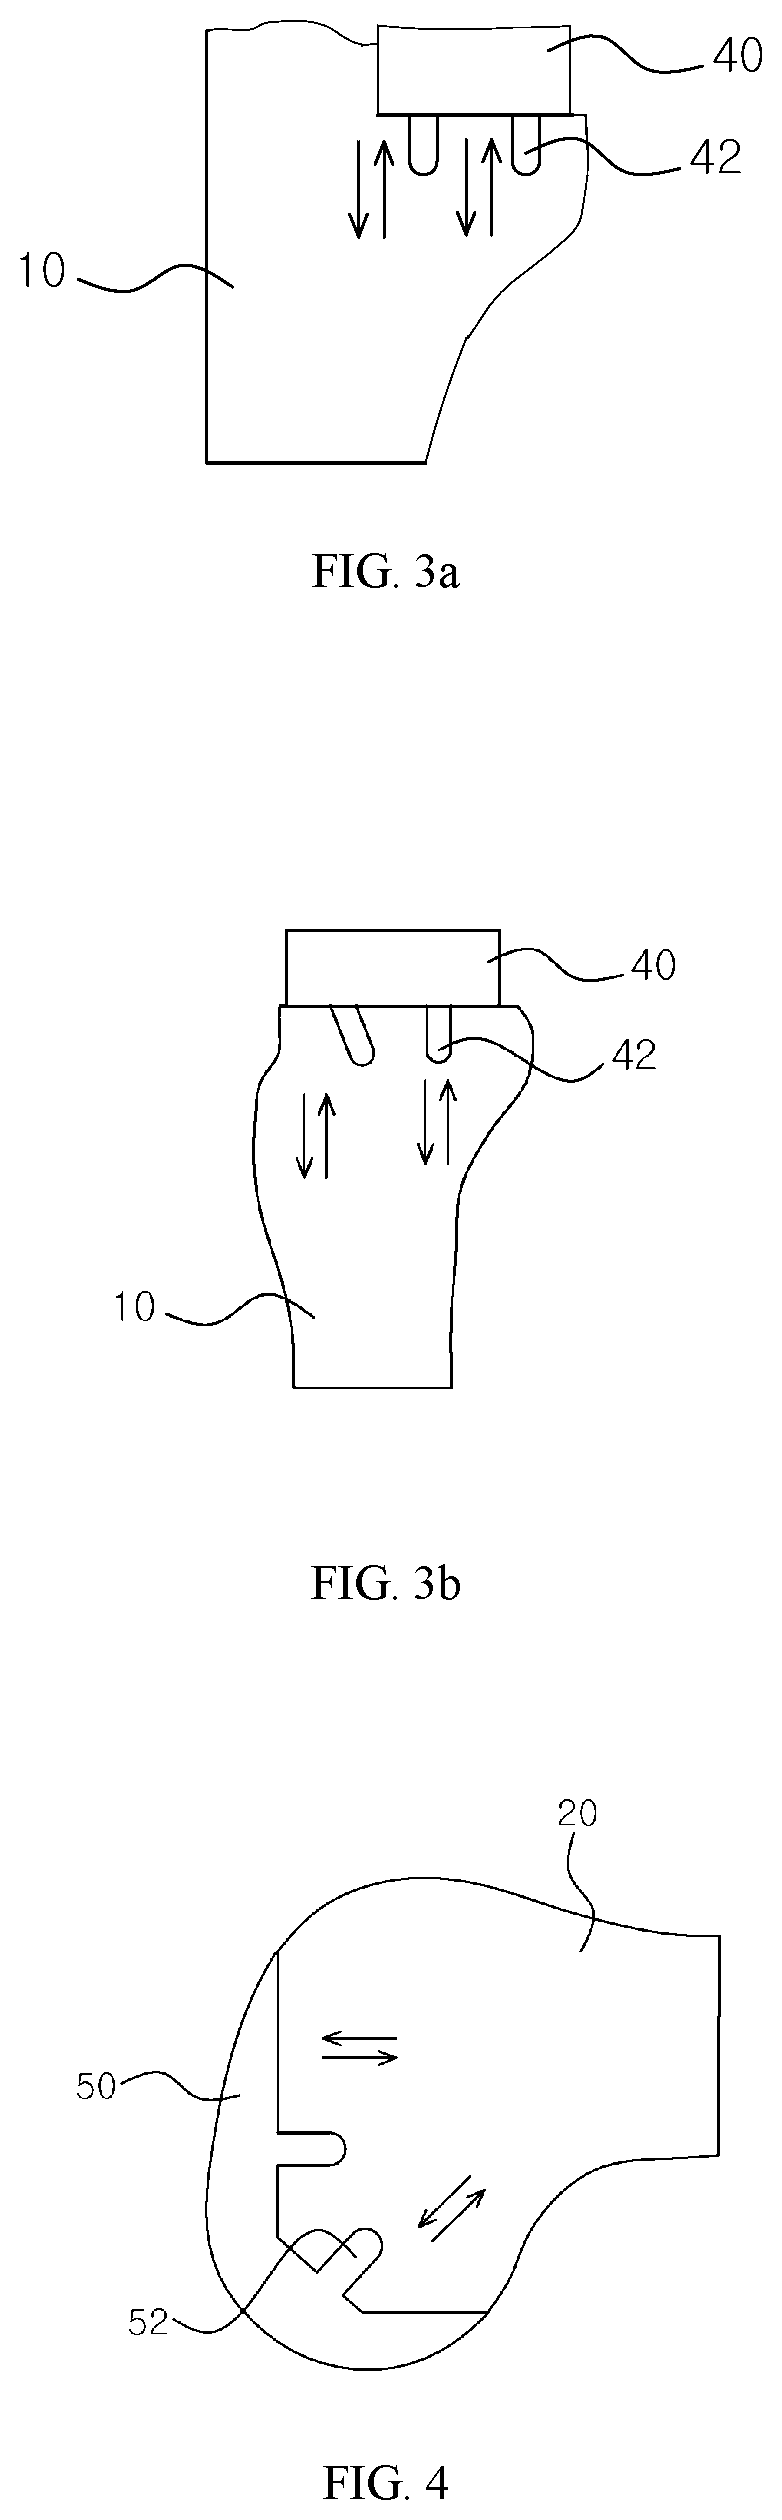 Resection guide, trial knee joint implant, and surgical instrument for knee arthroplasty